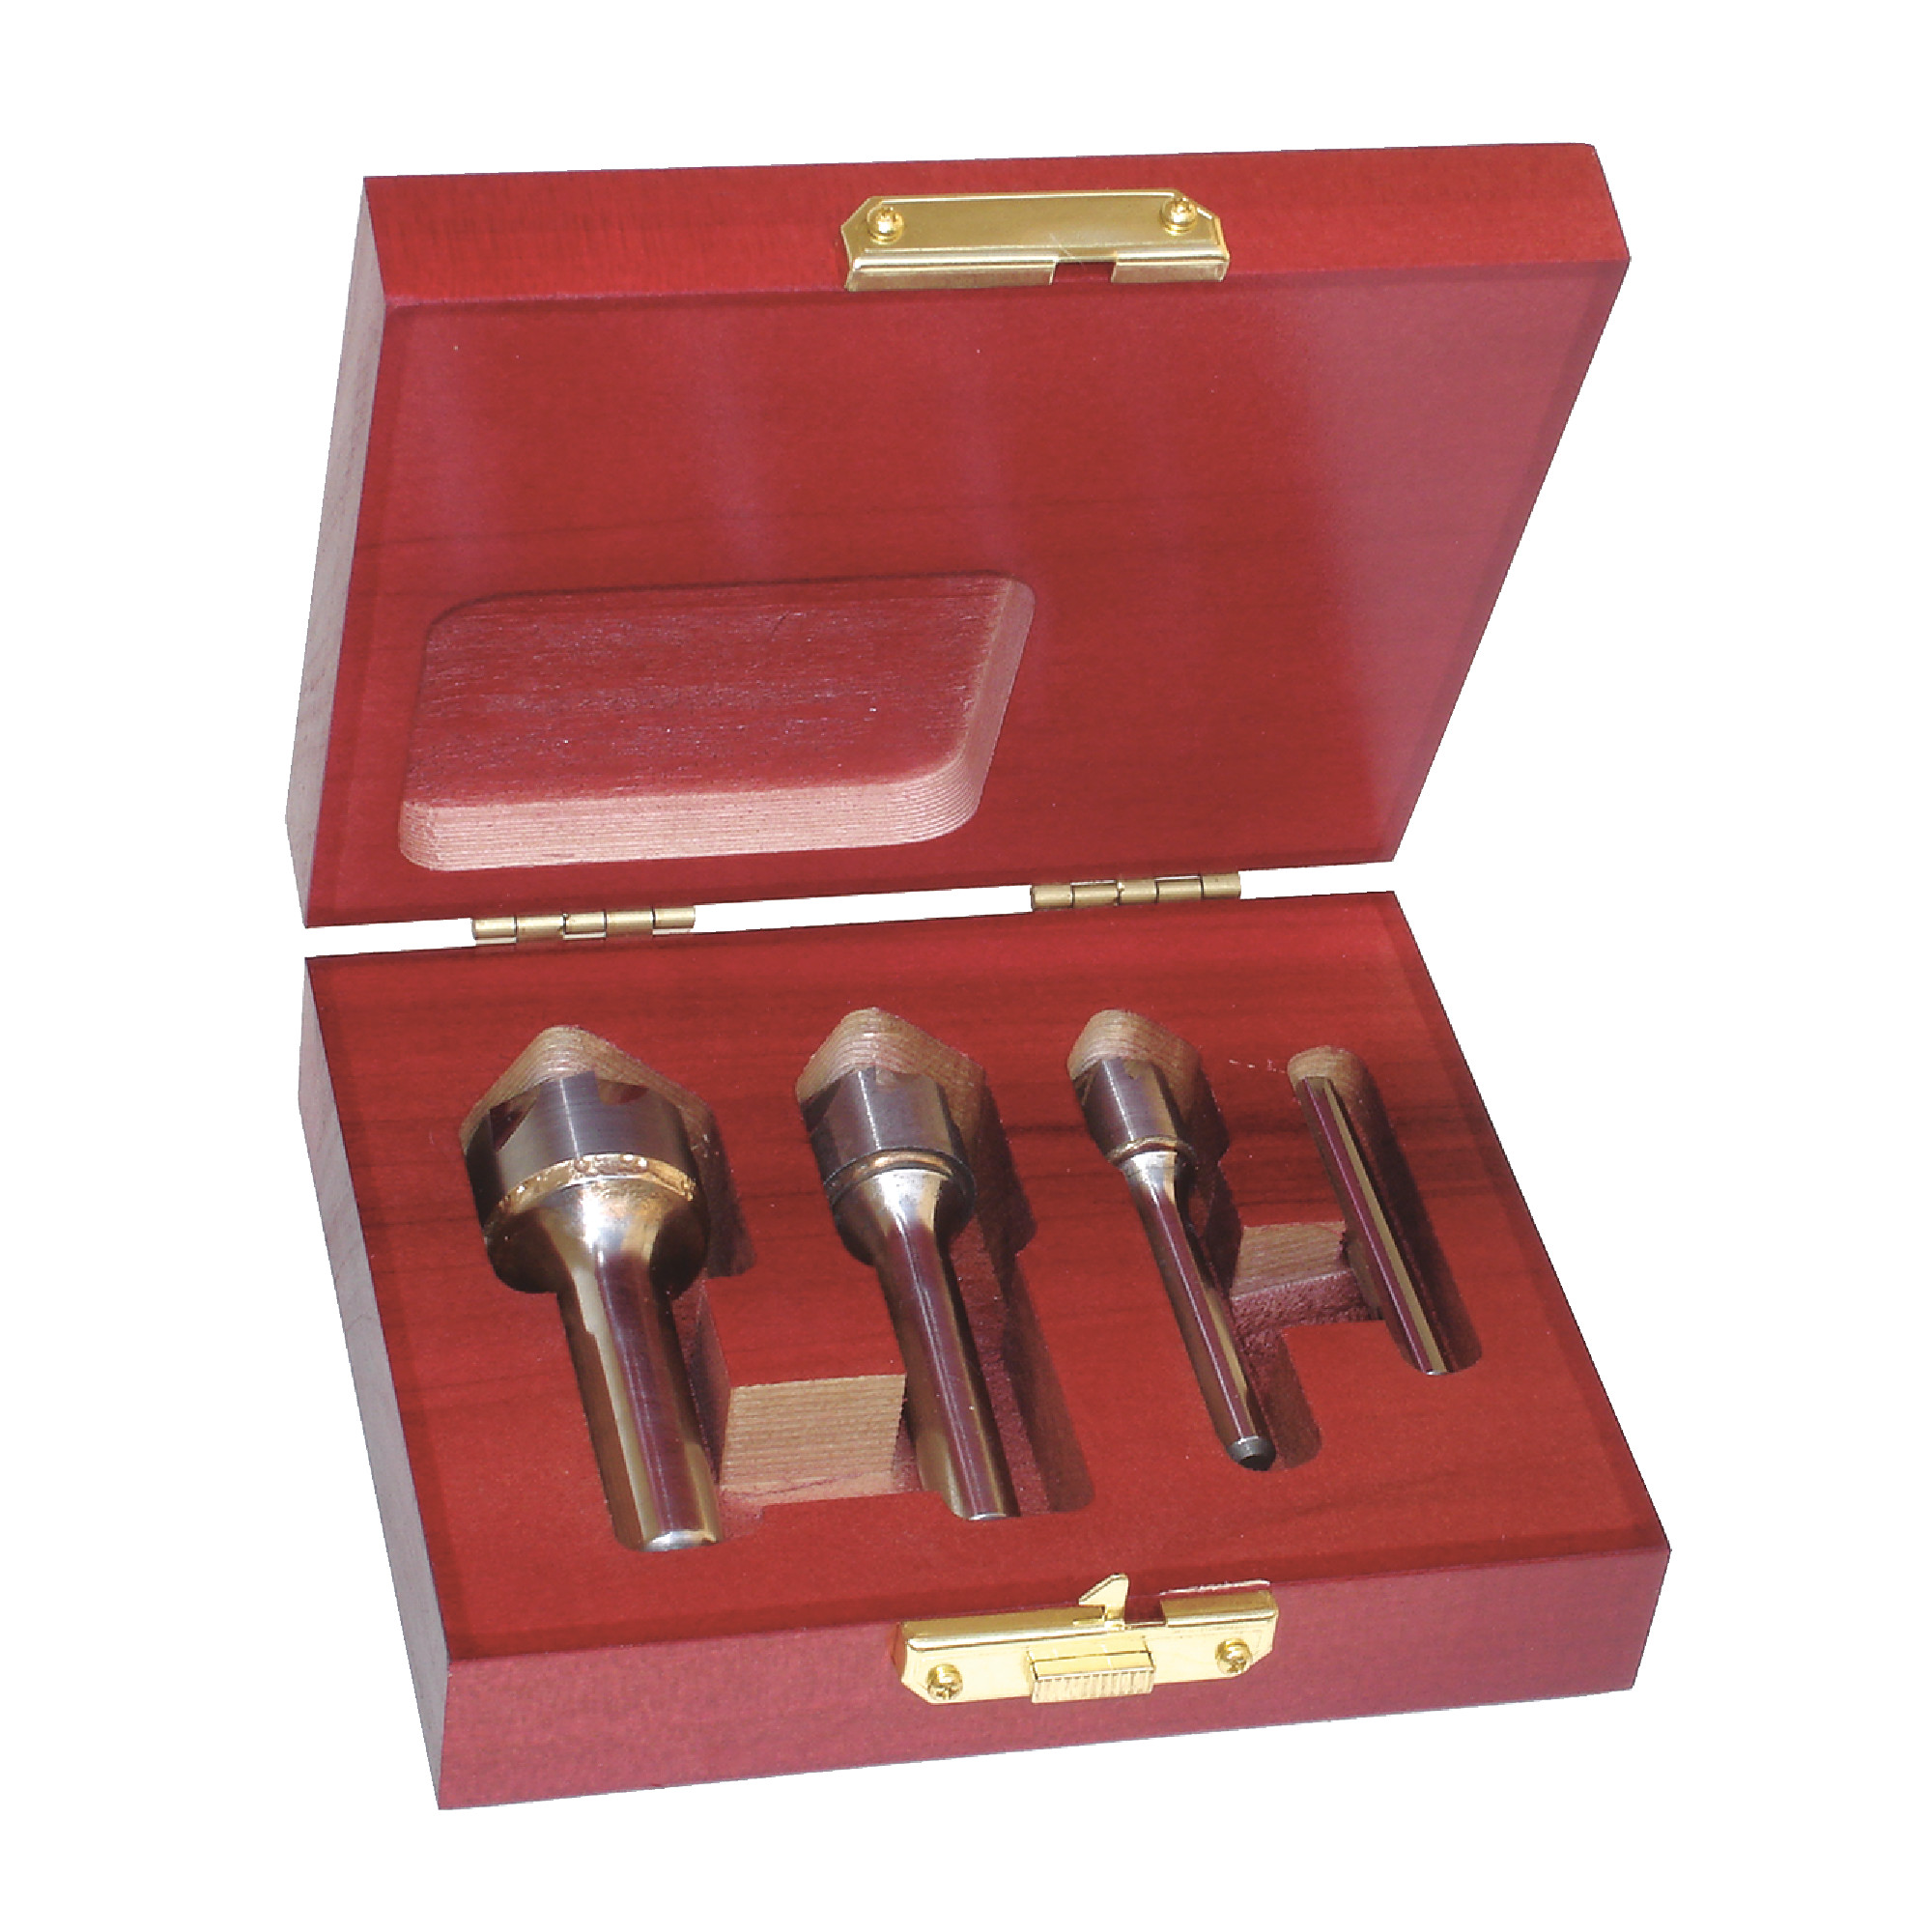 RUSHMORE USA 1 Flute 4 Piece 1/4" to 1" Carbide 82&#176; Included Angle Countersink Set